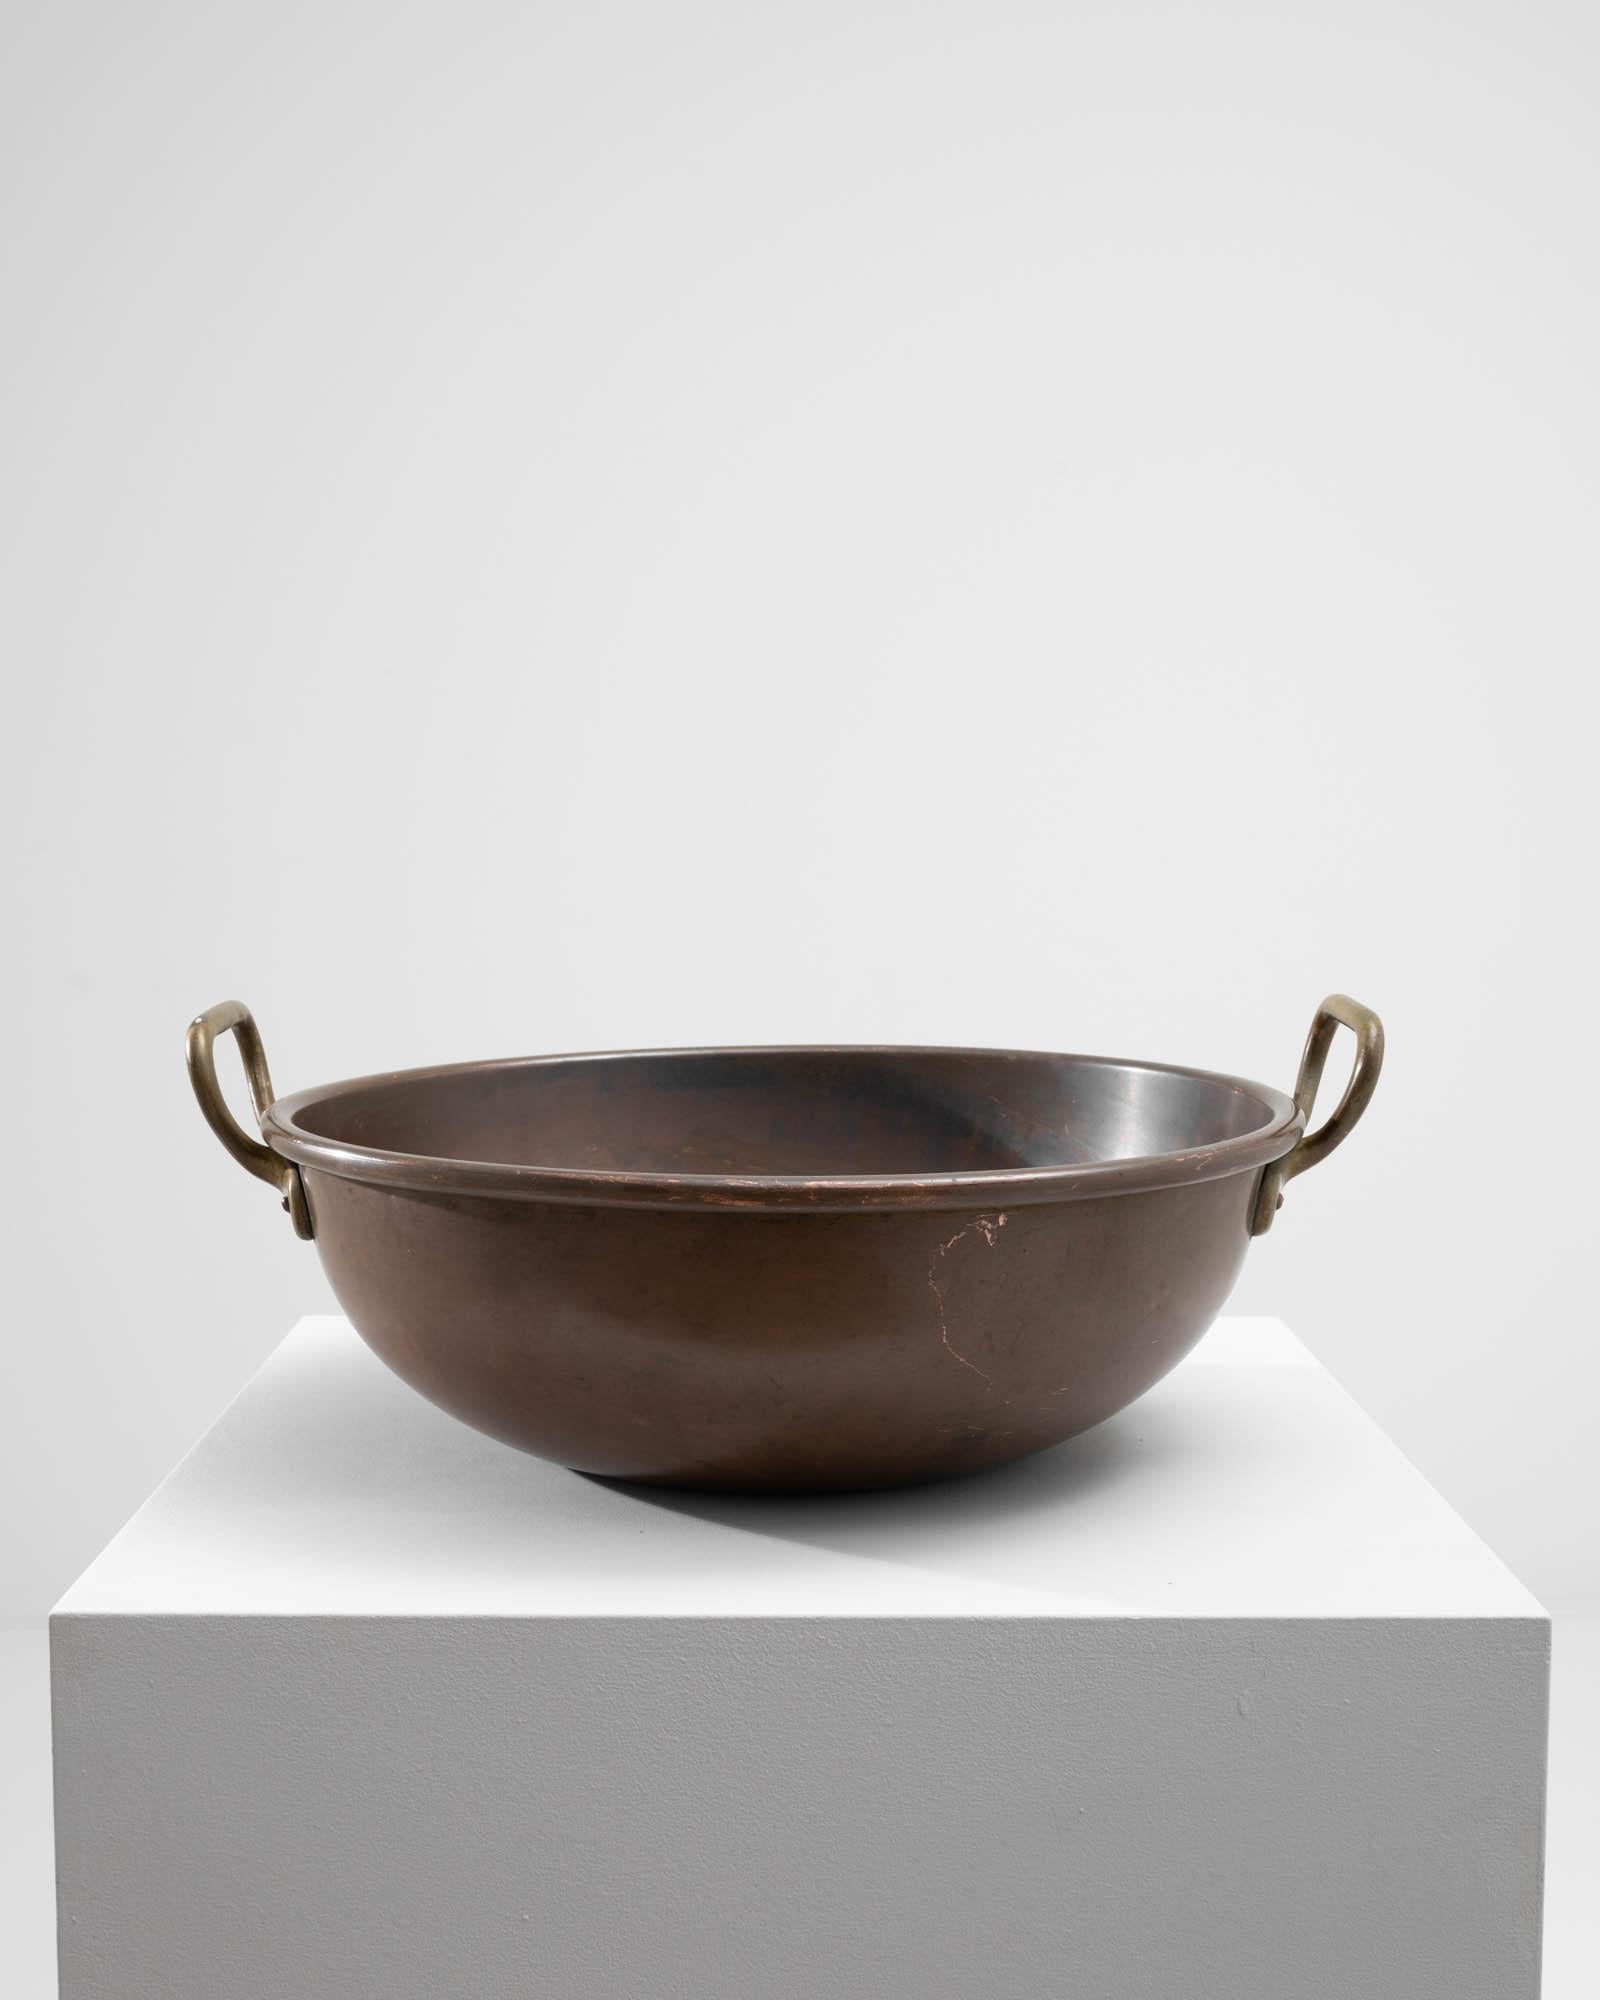 A copper bowl from the turn of the century Belgium. One of the best metals for conducting heat evenly, copper has been used for sauces, jams and marmalade making for centuries. A round shape, with upraised handles; the rich, rosy tone of the metal